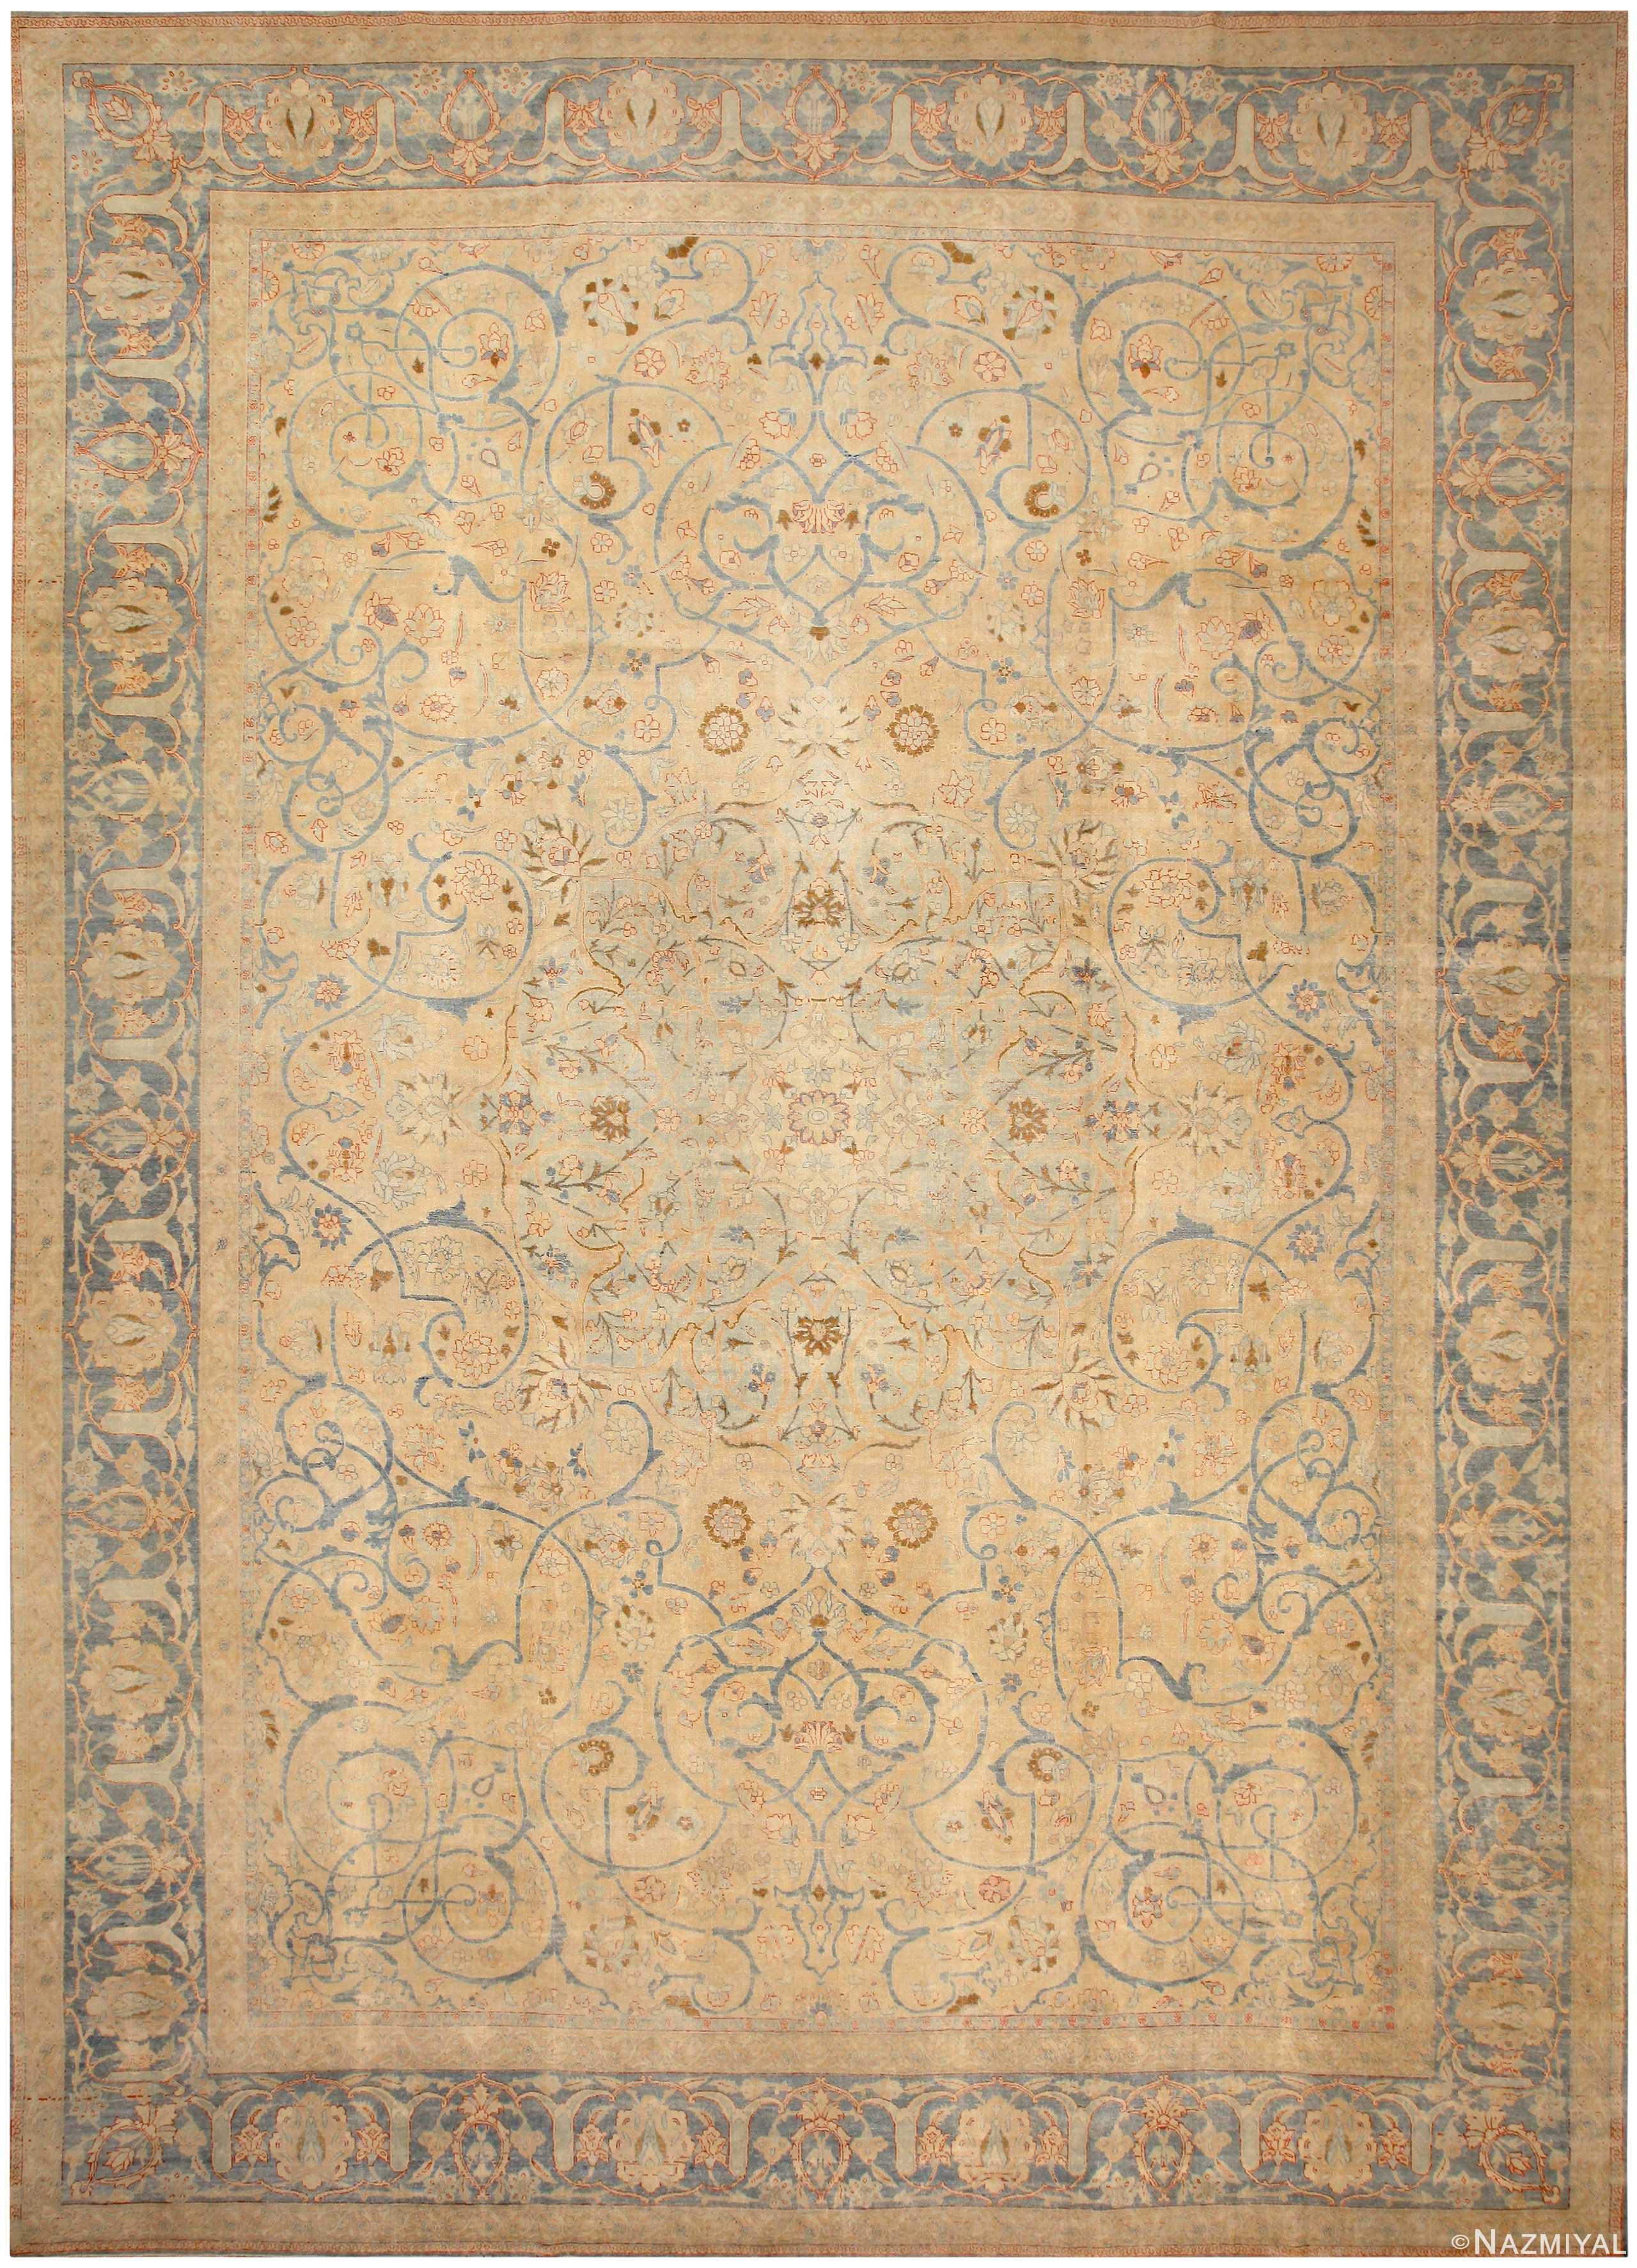 Antique Tabriz Persian Large Rug 71482 by Nazmiyal Antique Rugs